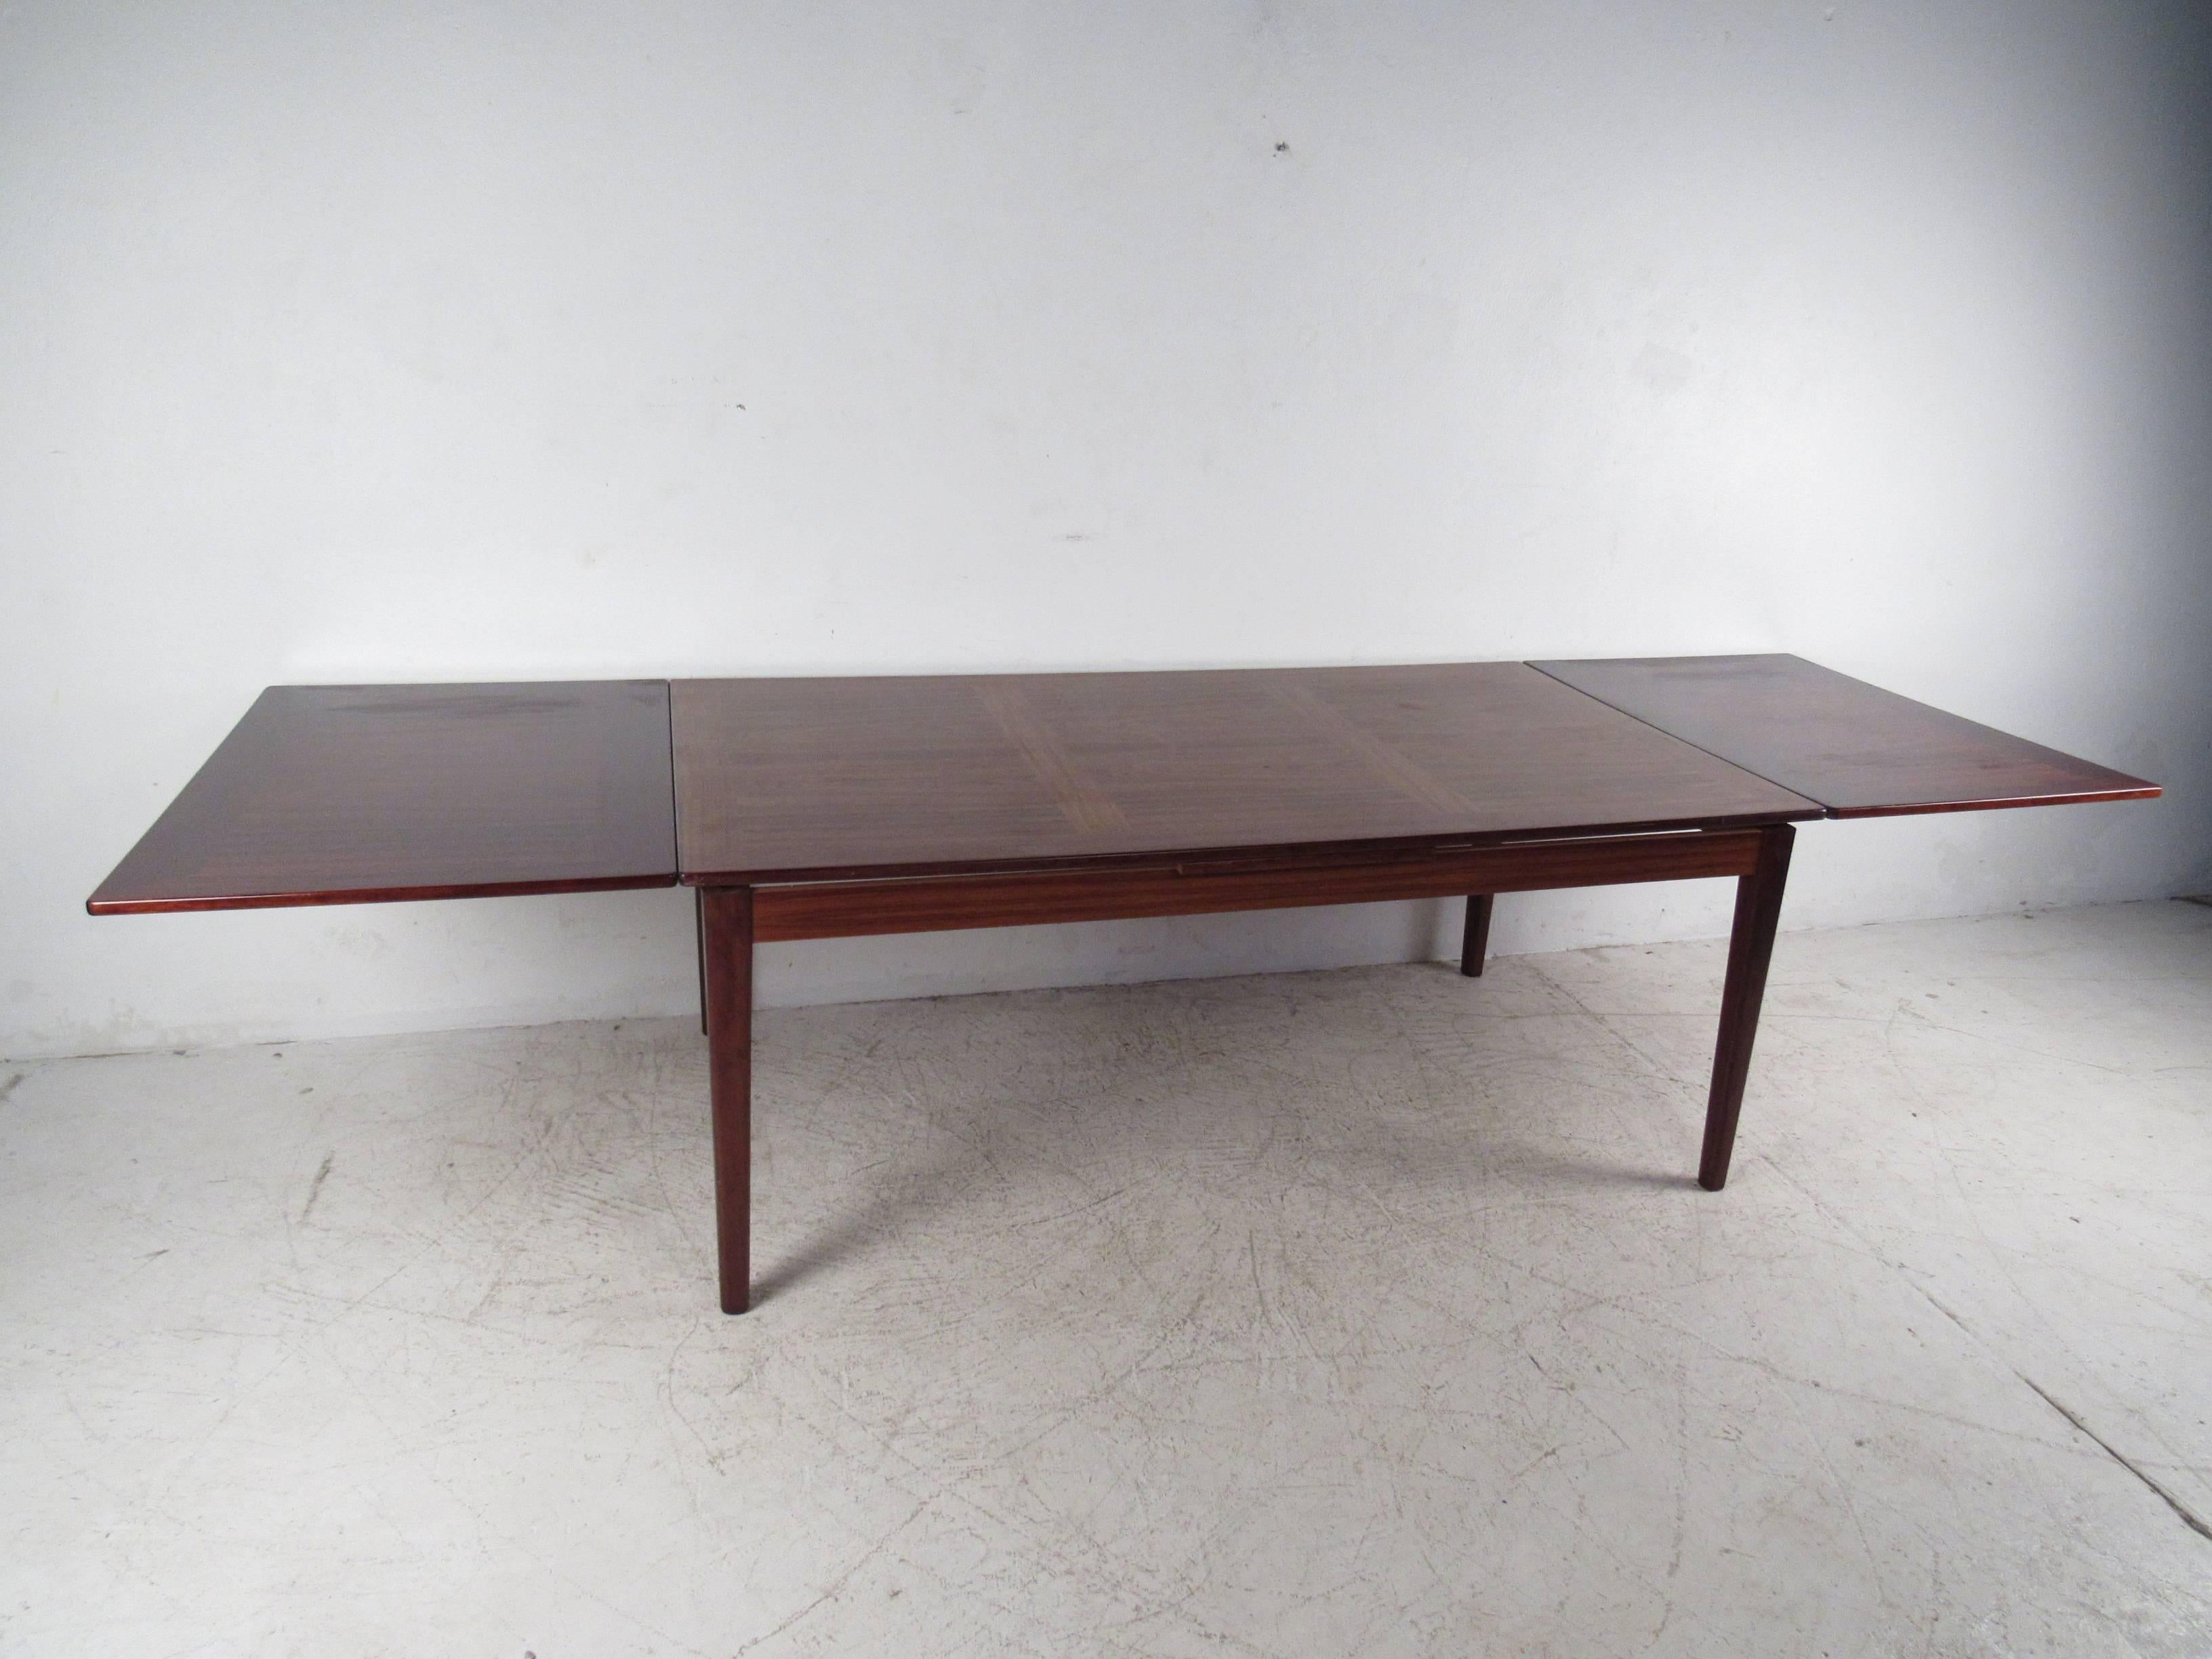 This gorgeous rosewood table has two leaves that spread out extending this table to 126